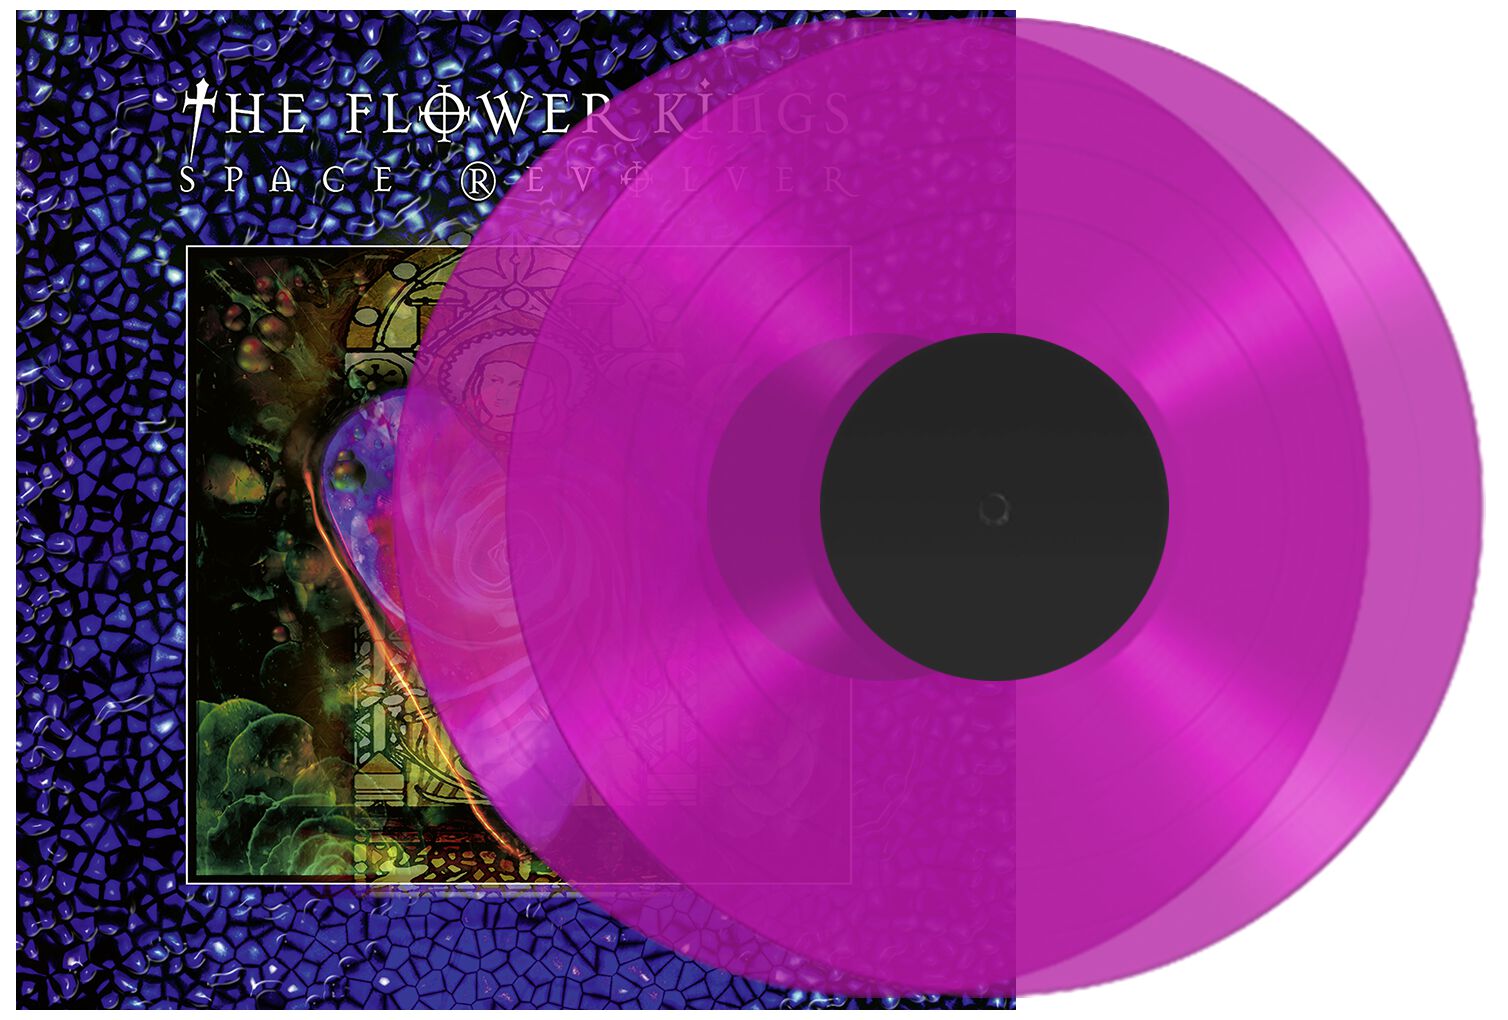 The Flower Kings Space revolver LP coloured